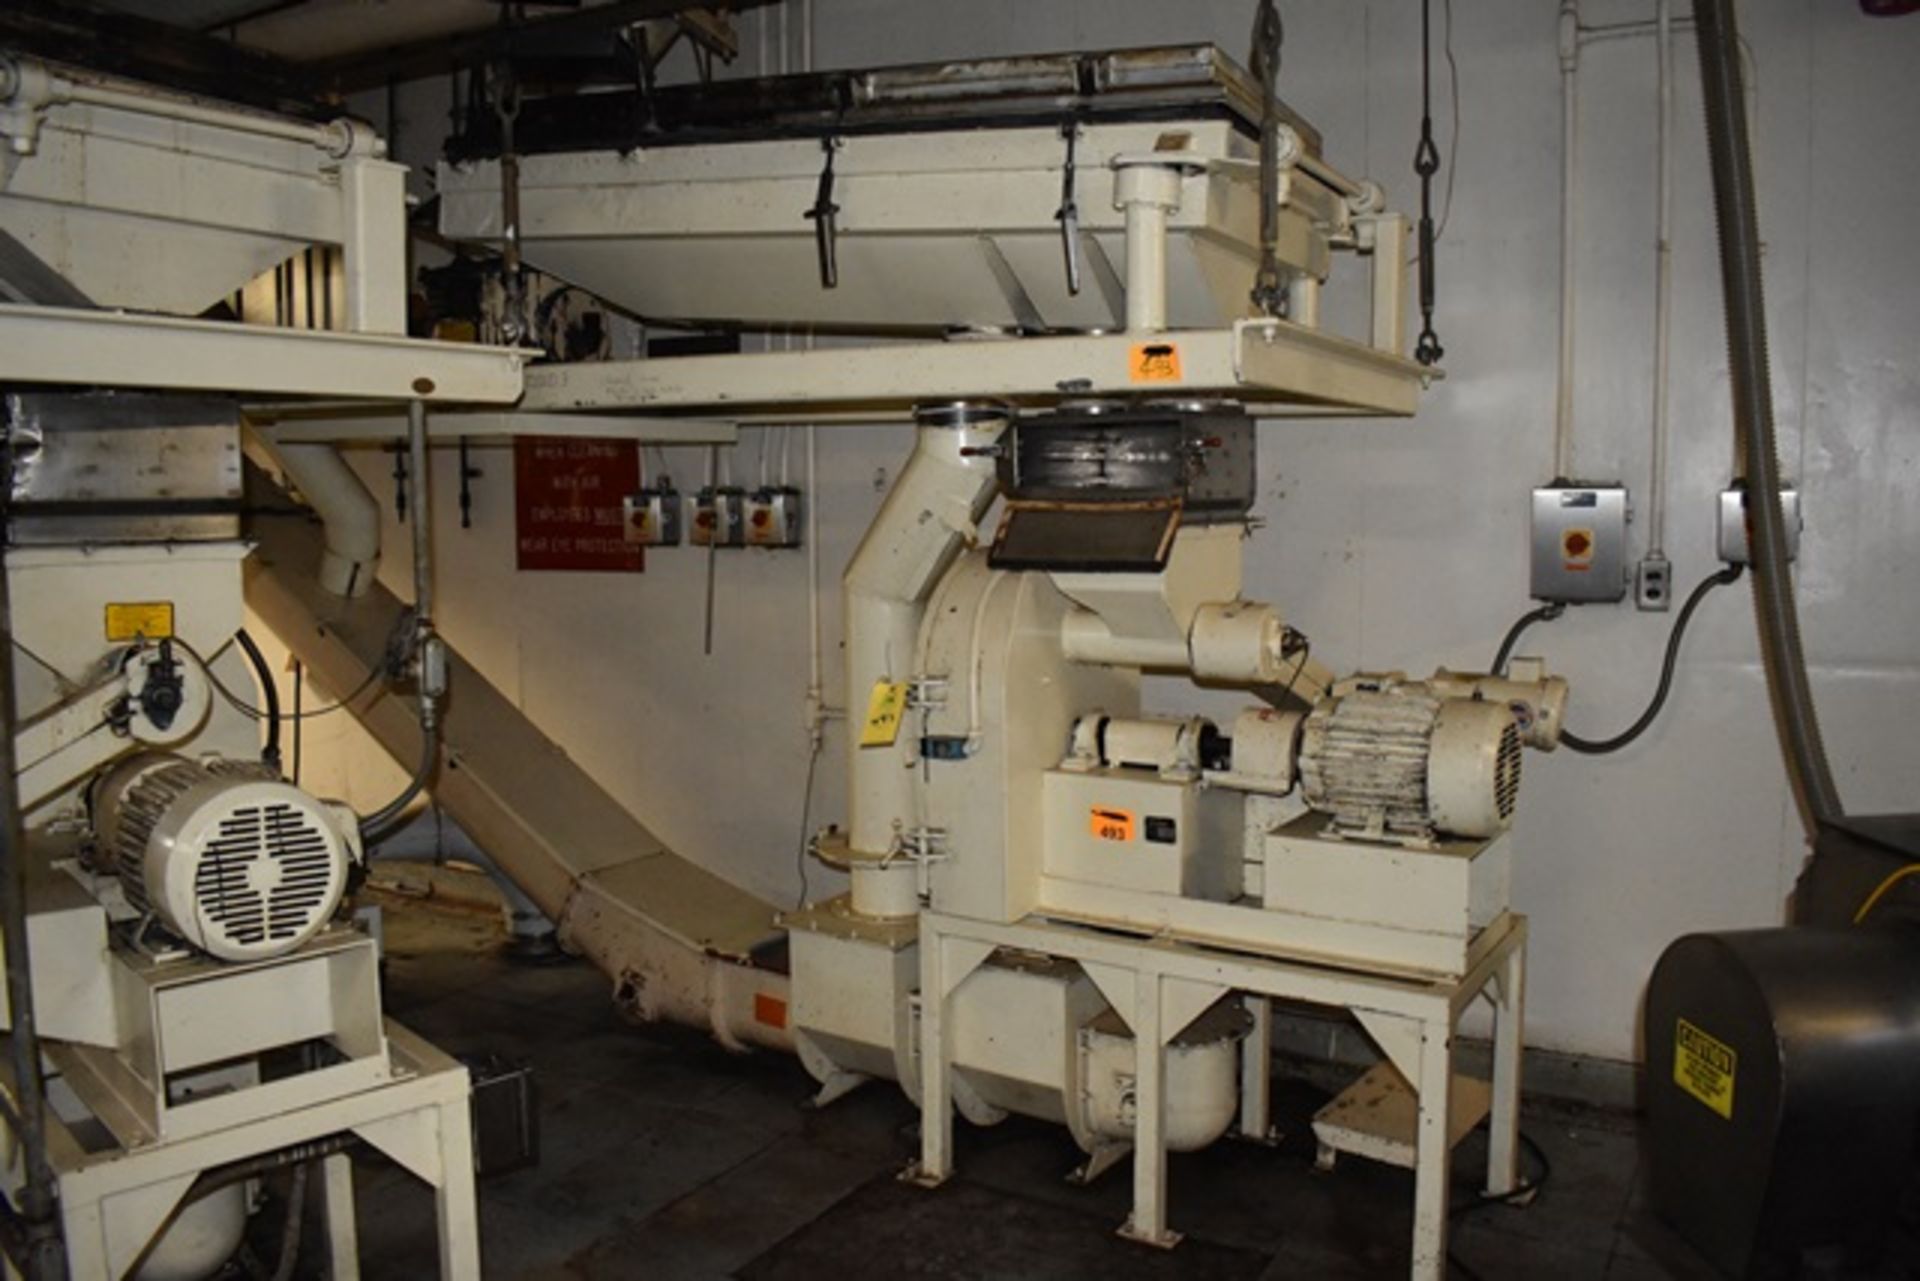 Jacobson hammermill, model P-160-DFF, s/n 36876, with 4" dia screw feeder, 10hp drive @ 9:95 ration, - Image 2 of 2